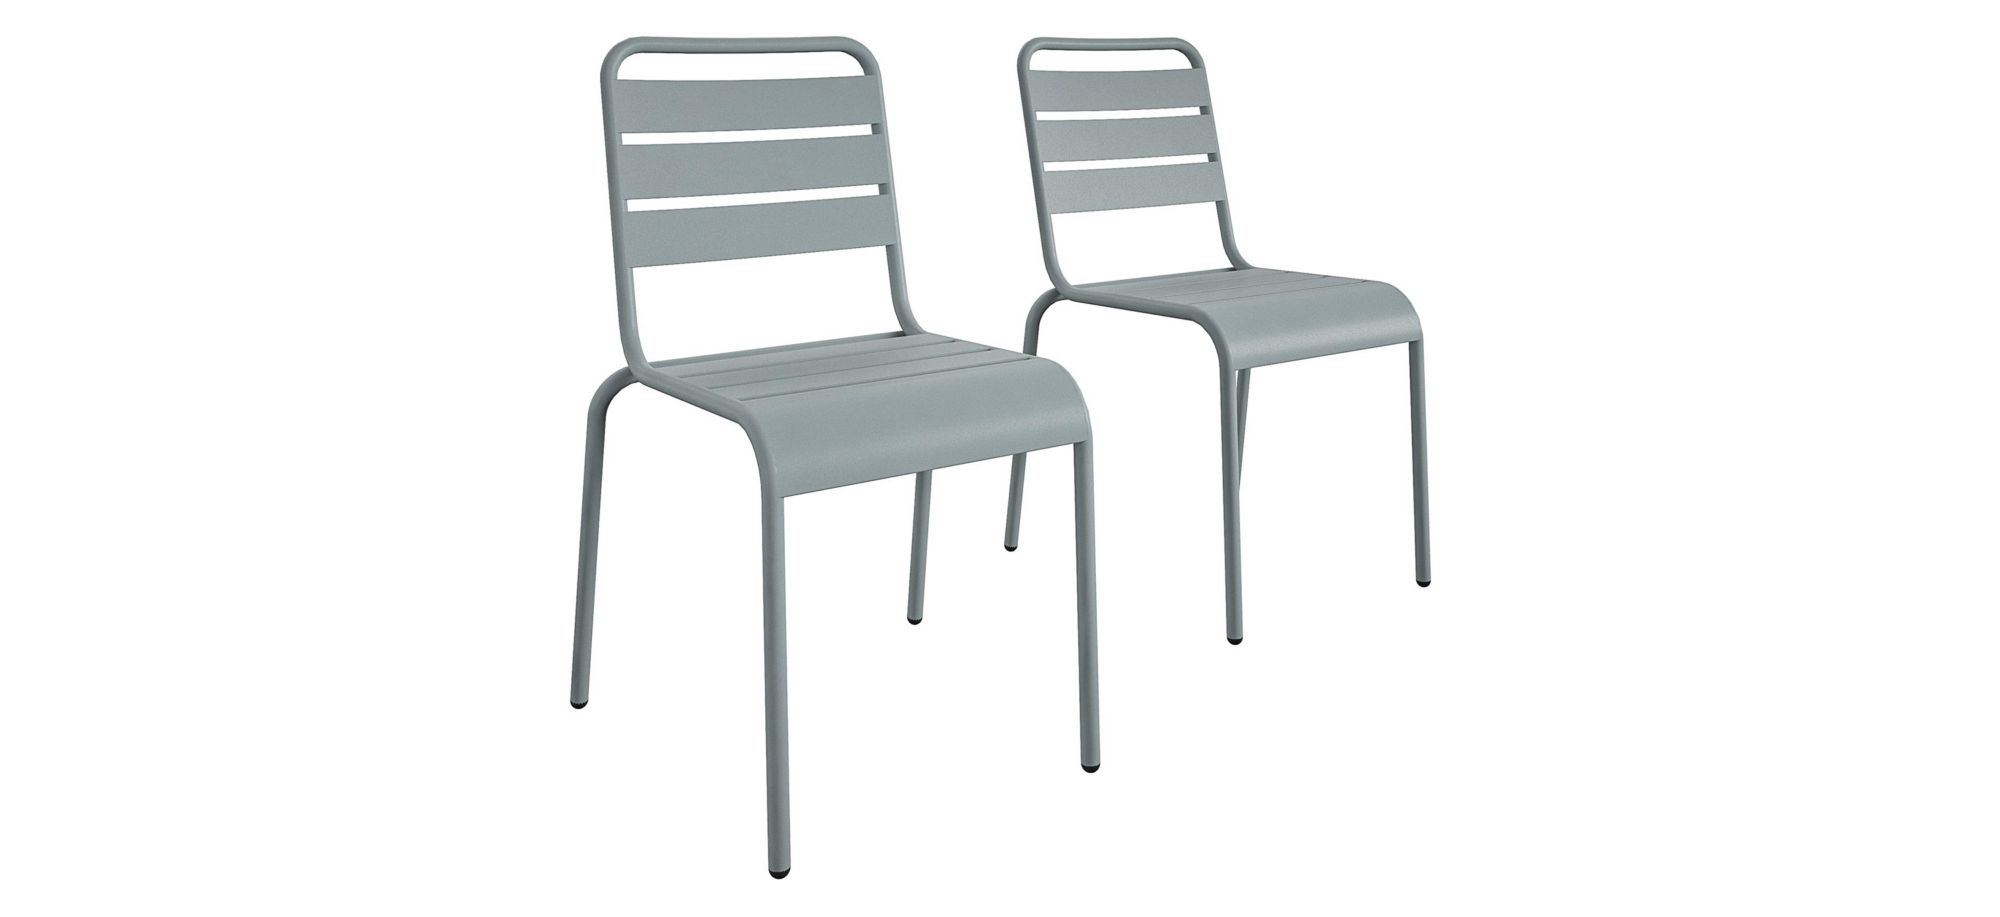 Novogratz Poolside Gossip Outdoor June Stacking Dining Chairs - Set of 2 in Light Gray by DOREL HOME FURNISHINGS